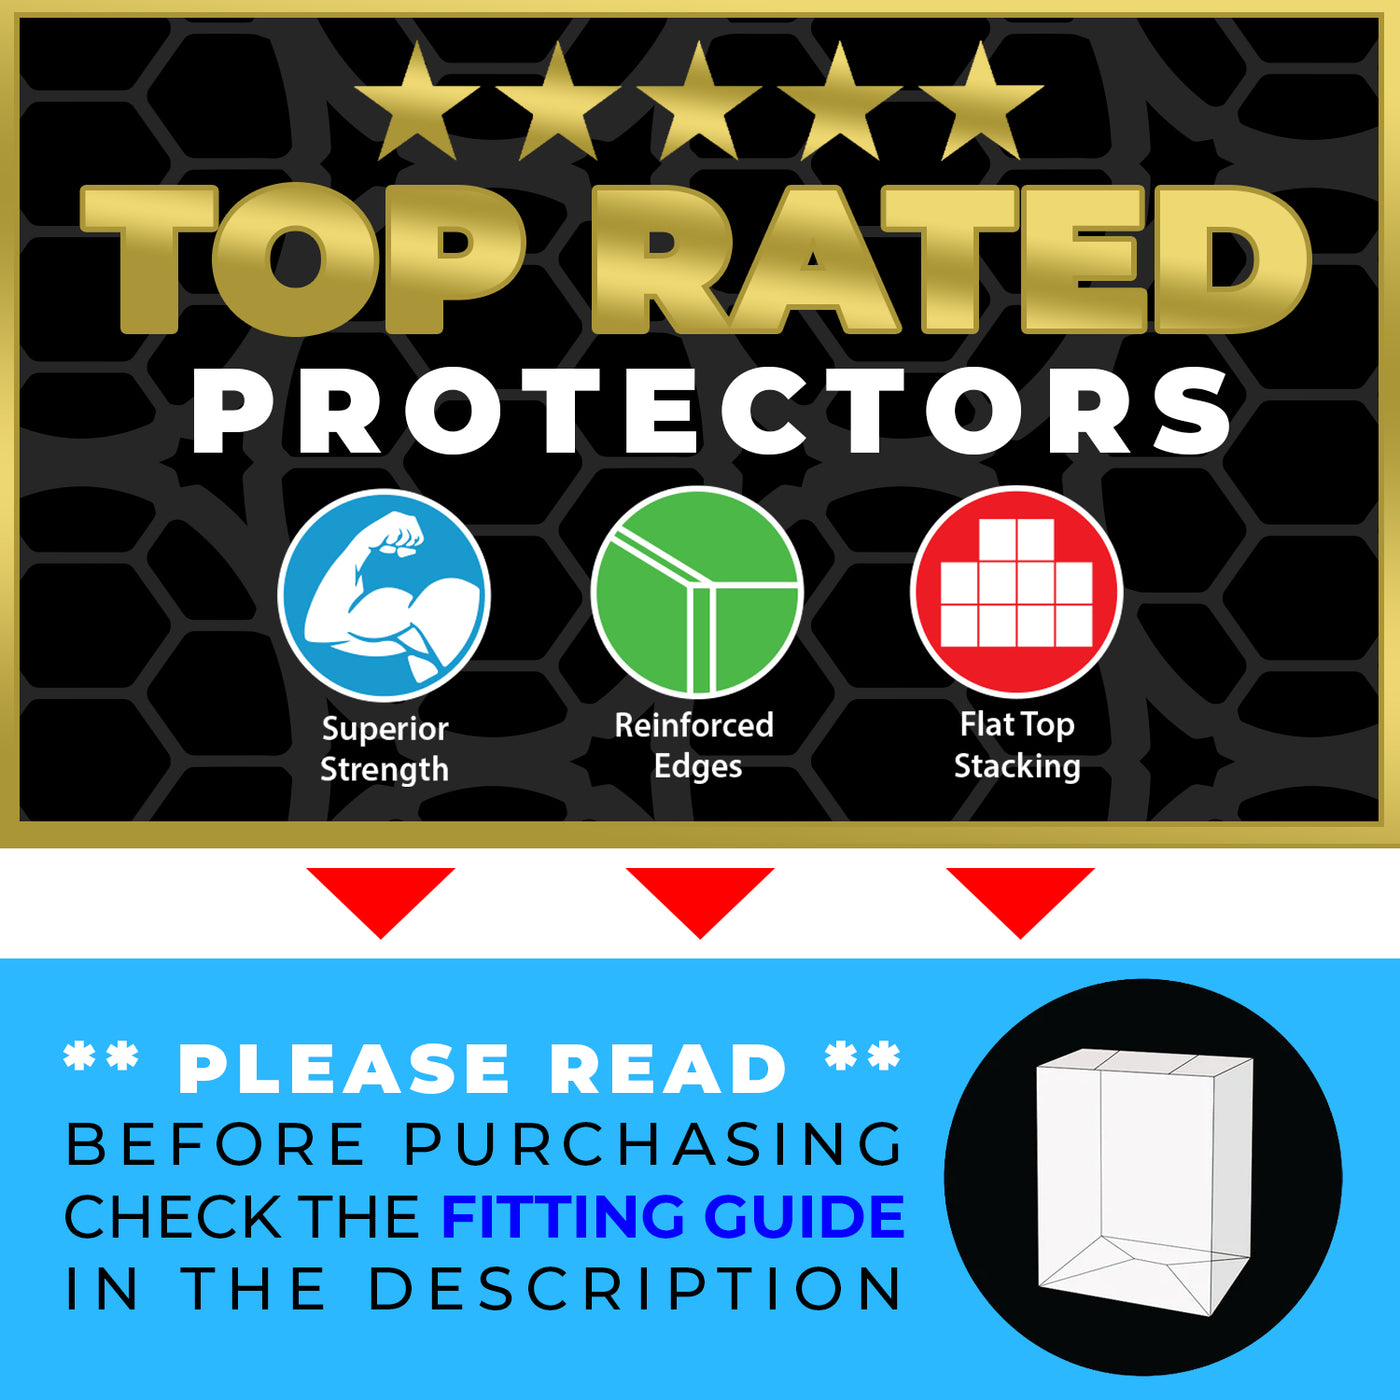 galactus wide 10 inch best funko pop protectors thick strong uv scratch flat top stack vinyl display geek plastic shield vaulted eco armor fits collect protect display case kollector protector